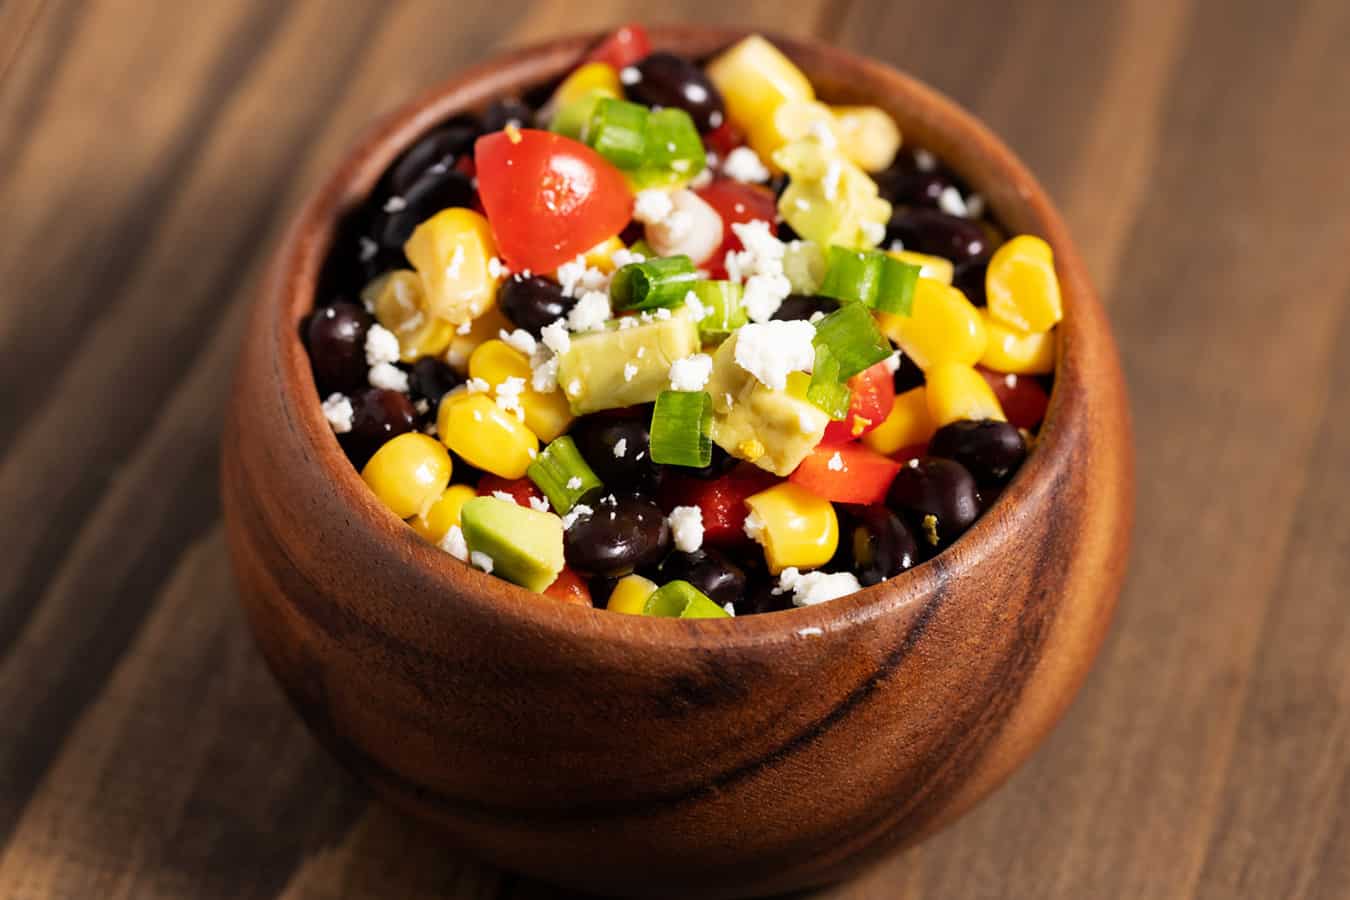 Black bean and corn salad in a bowl.